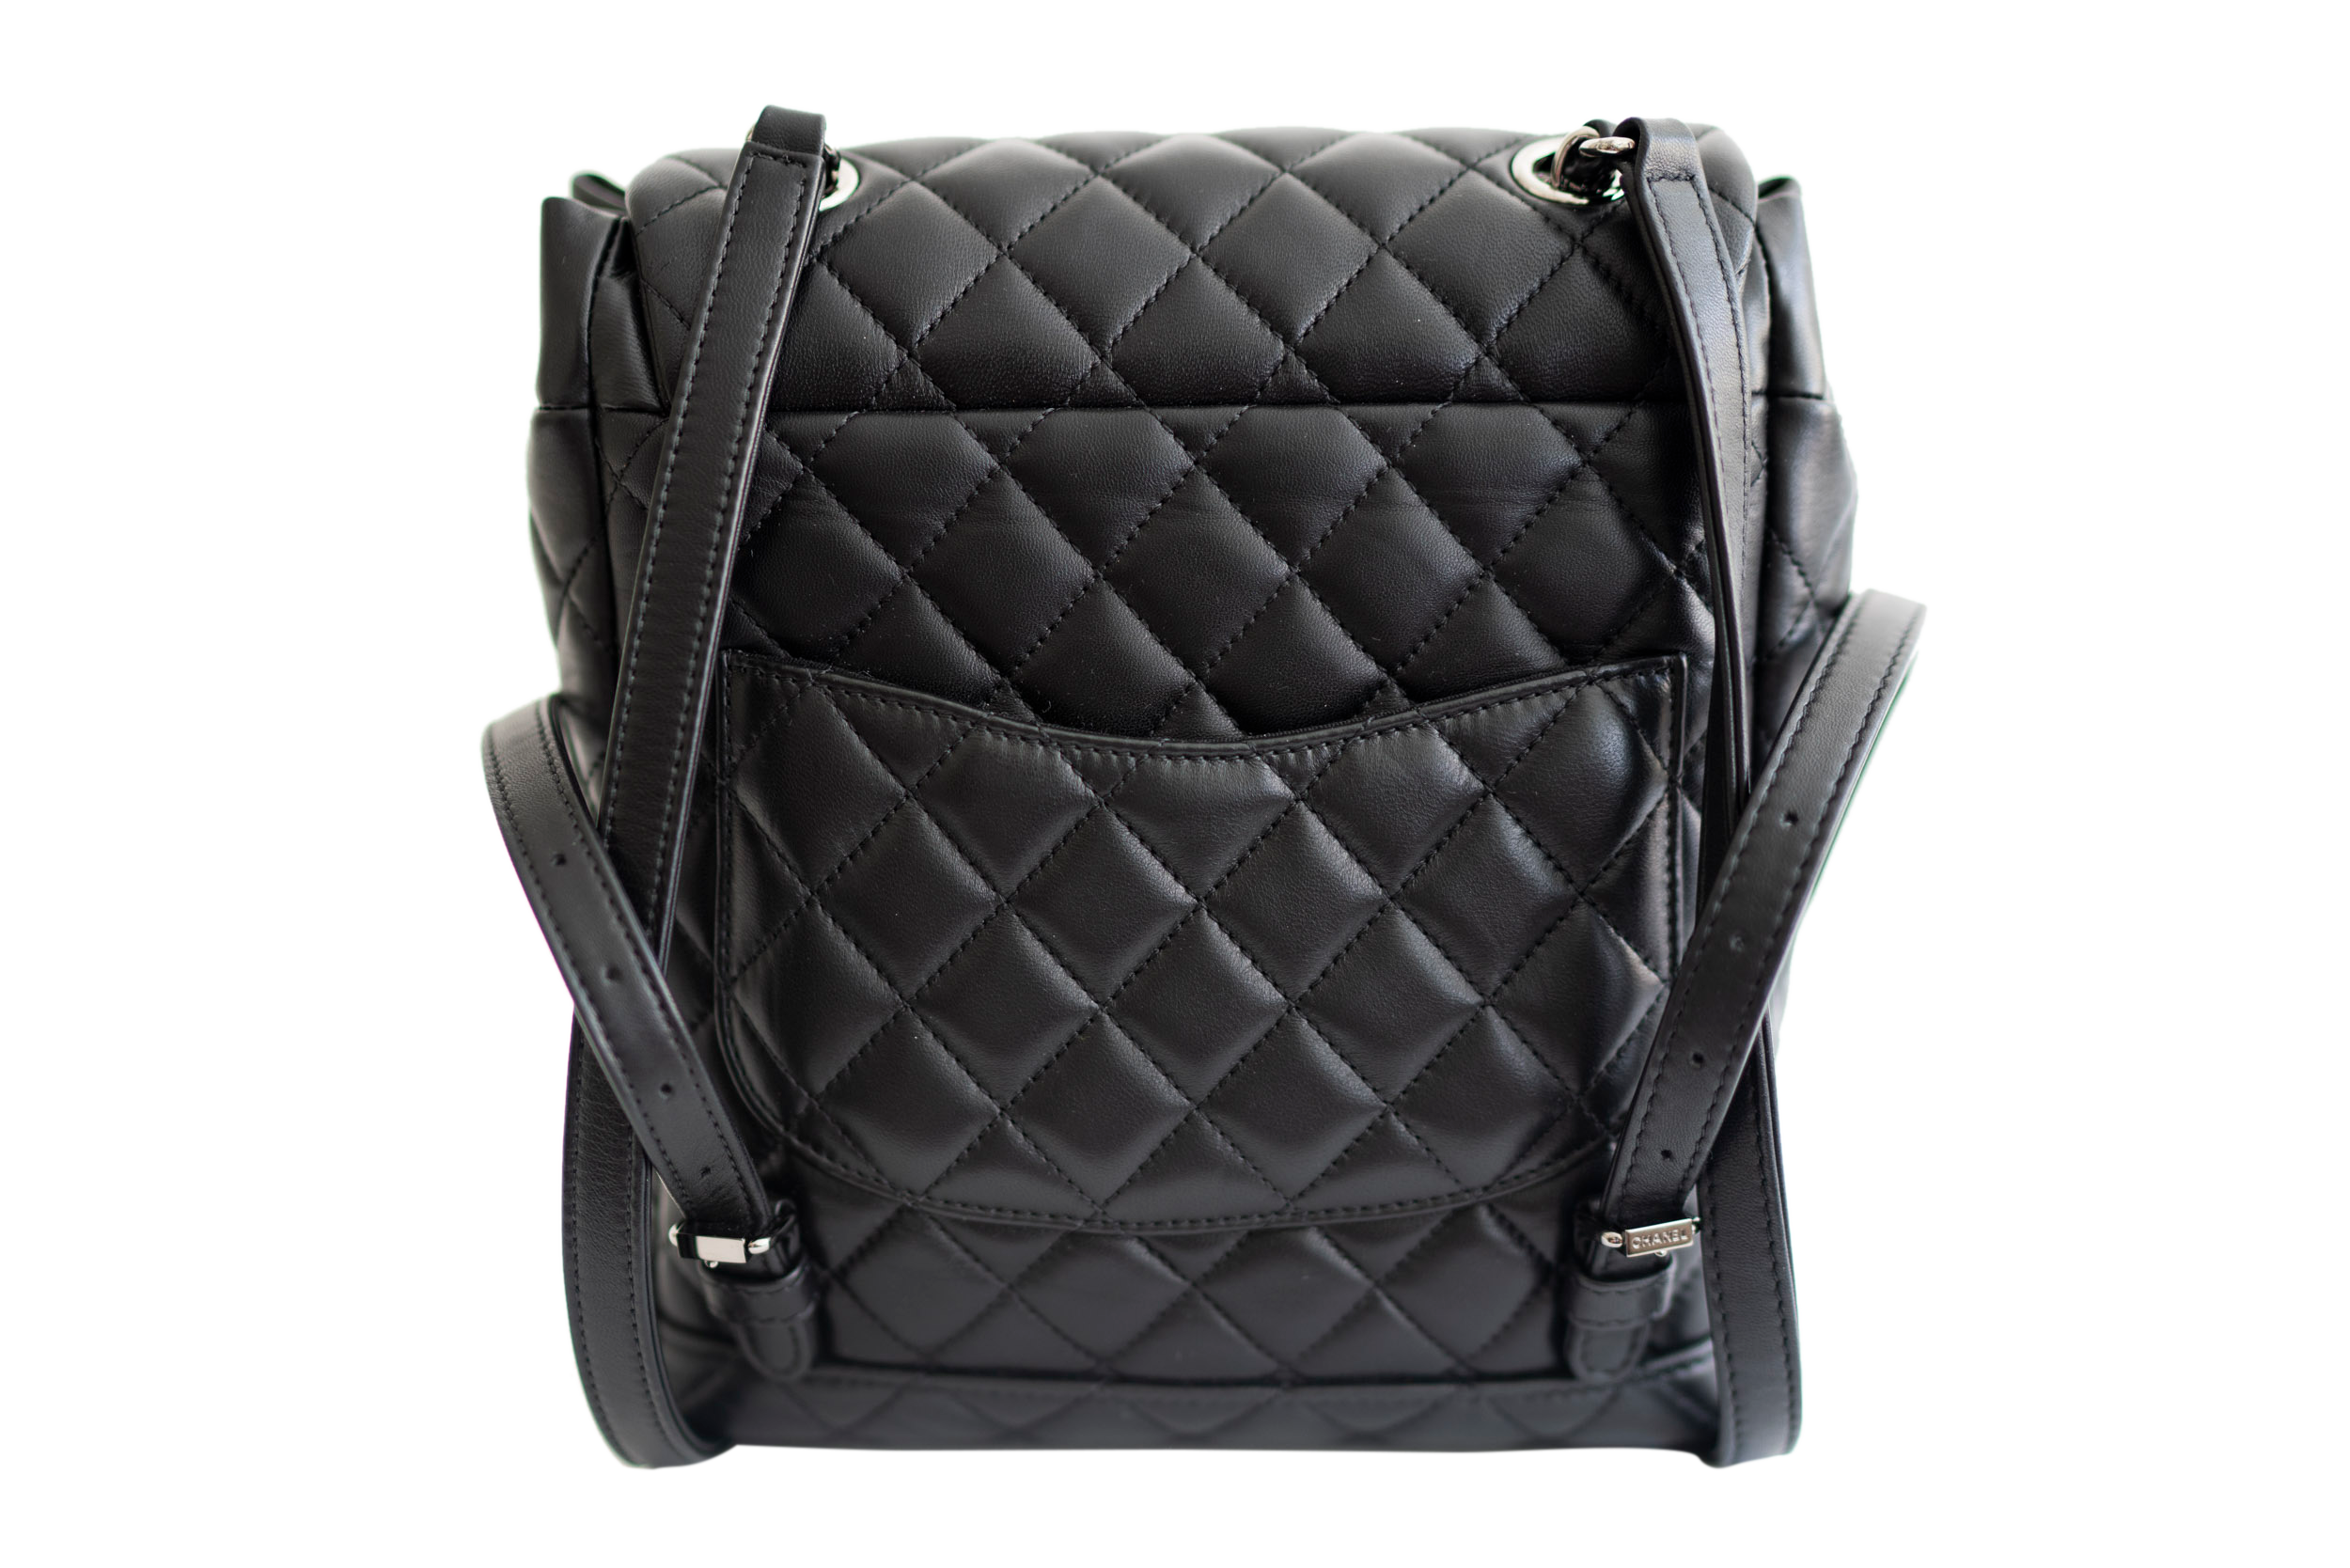 Urban Spirit Small Backpack Rent Chanel Bag at Luxury Fashion Rentals